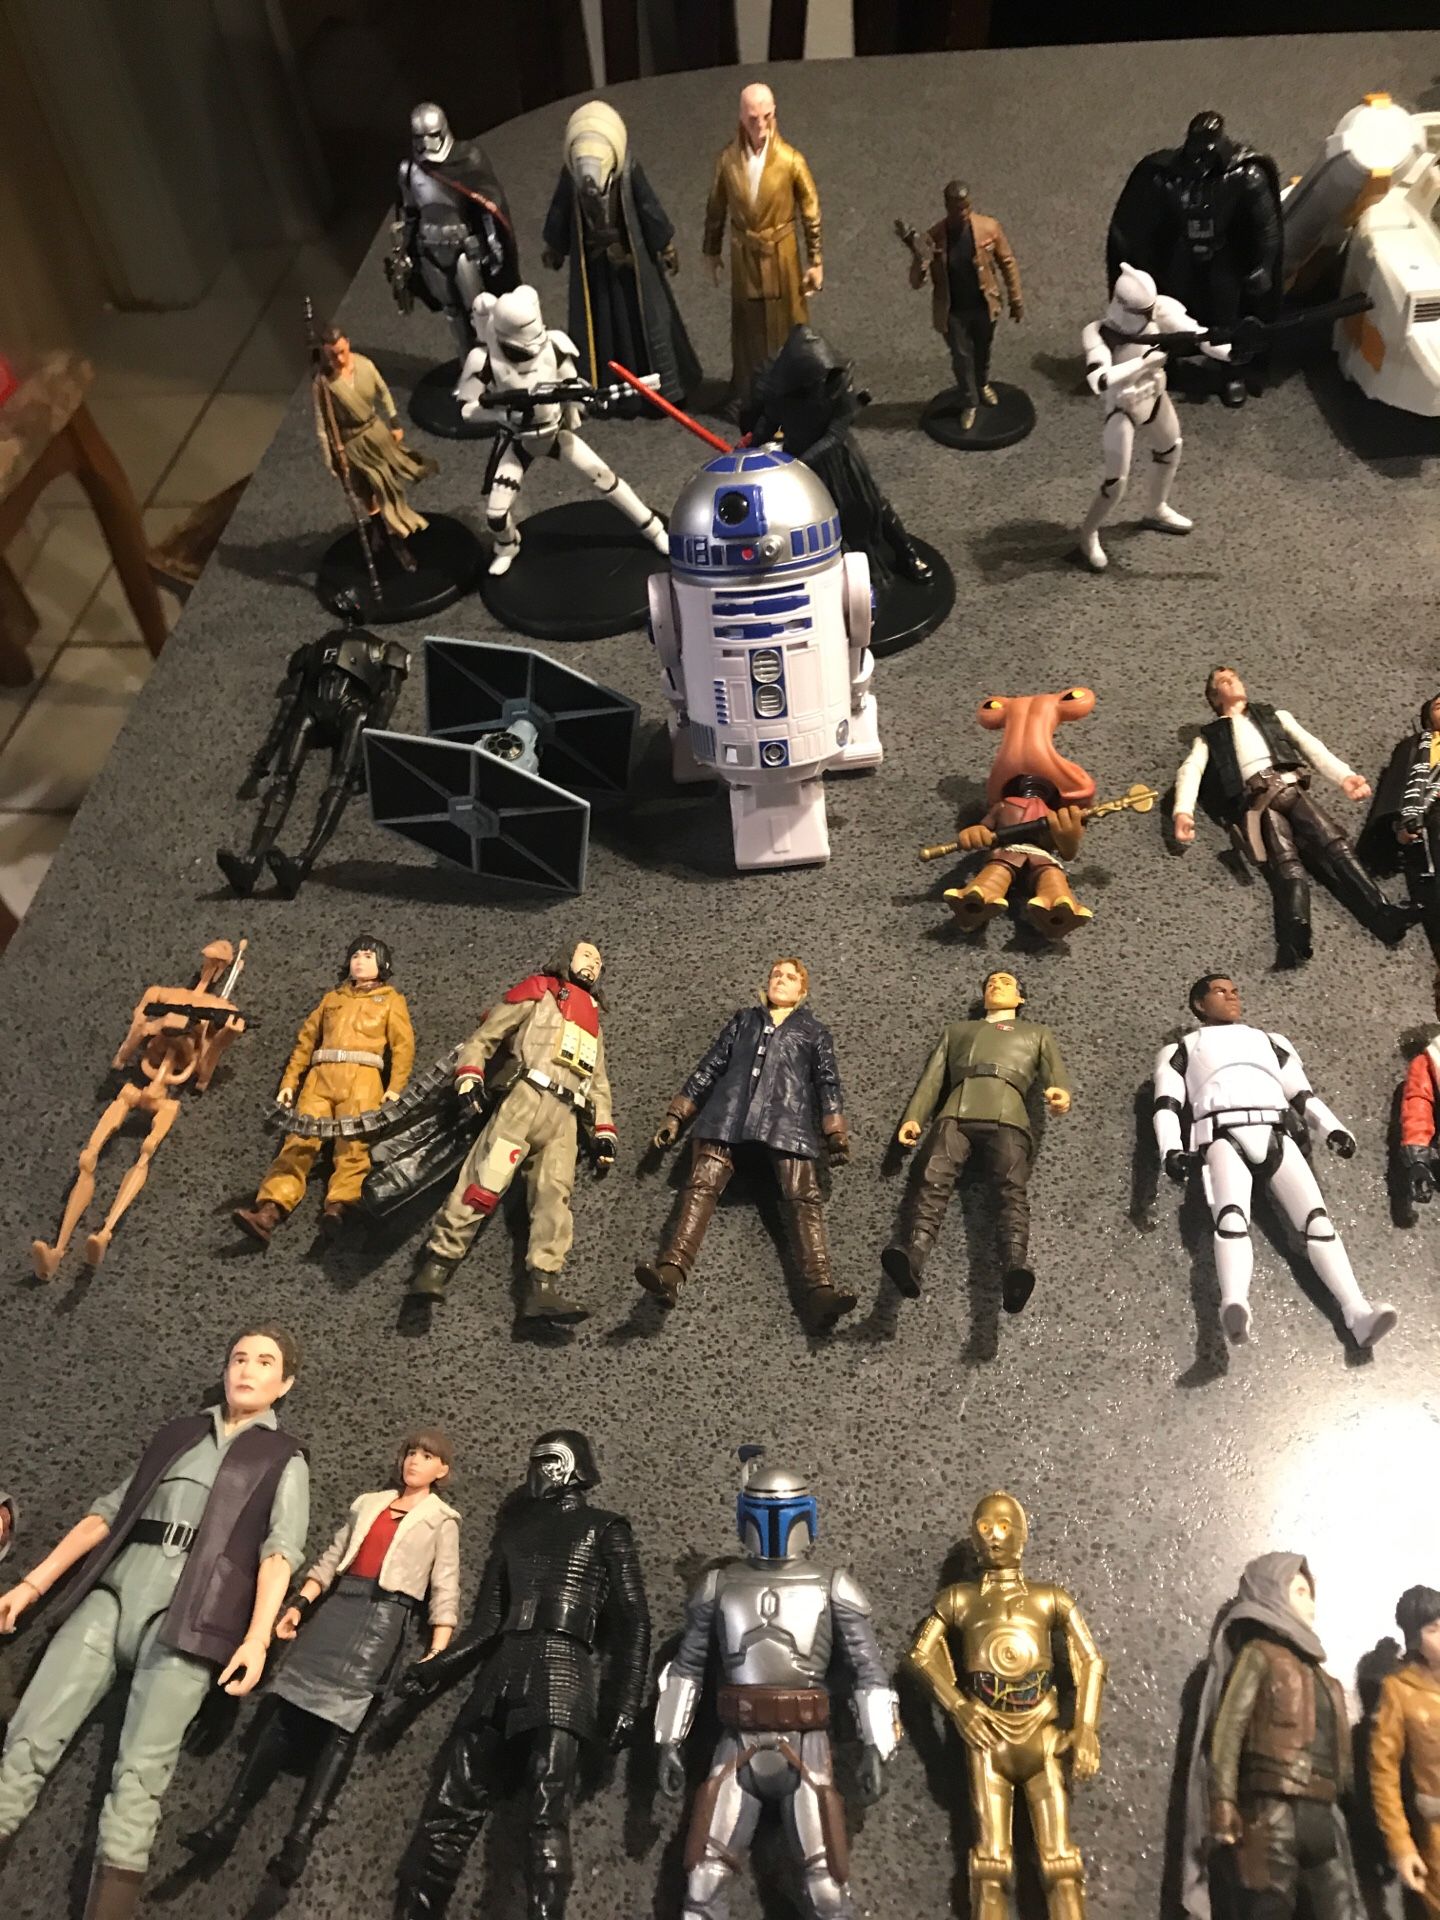 Star Wars action figures most 5.00 a piece